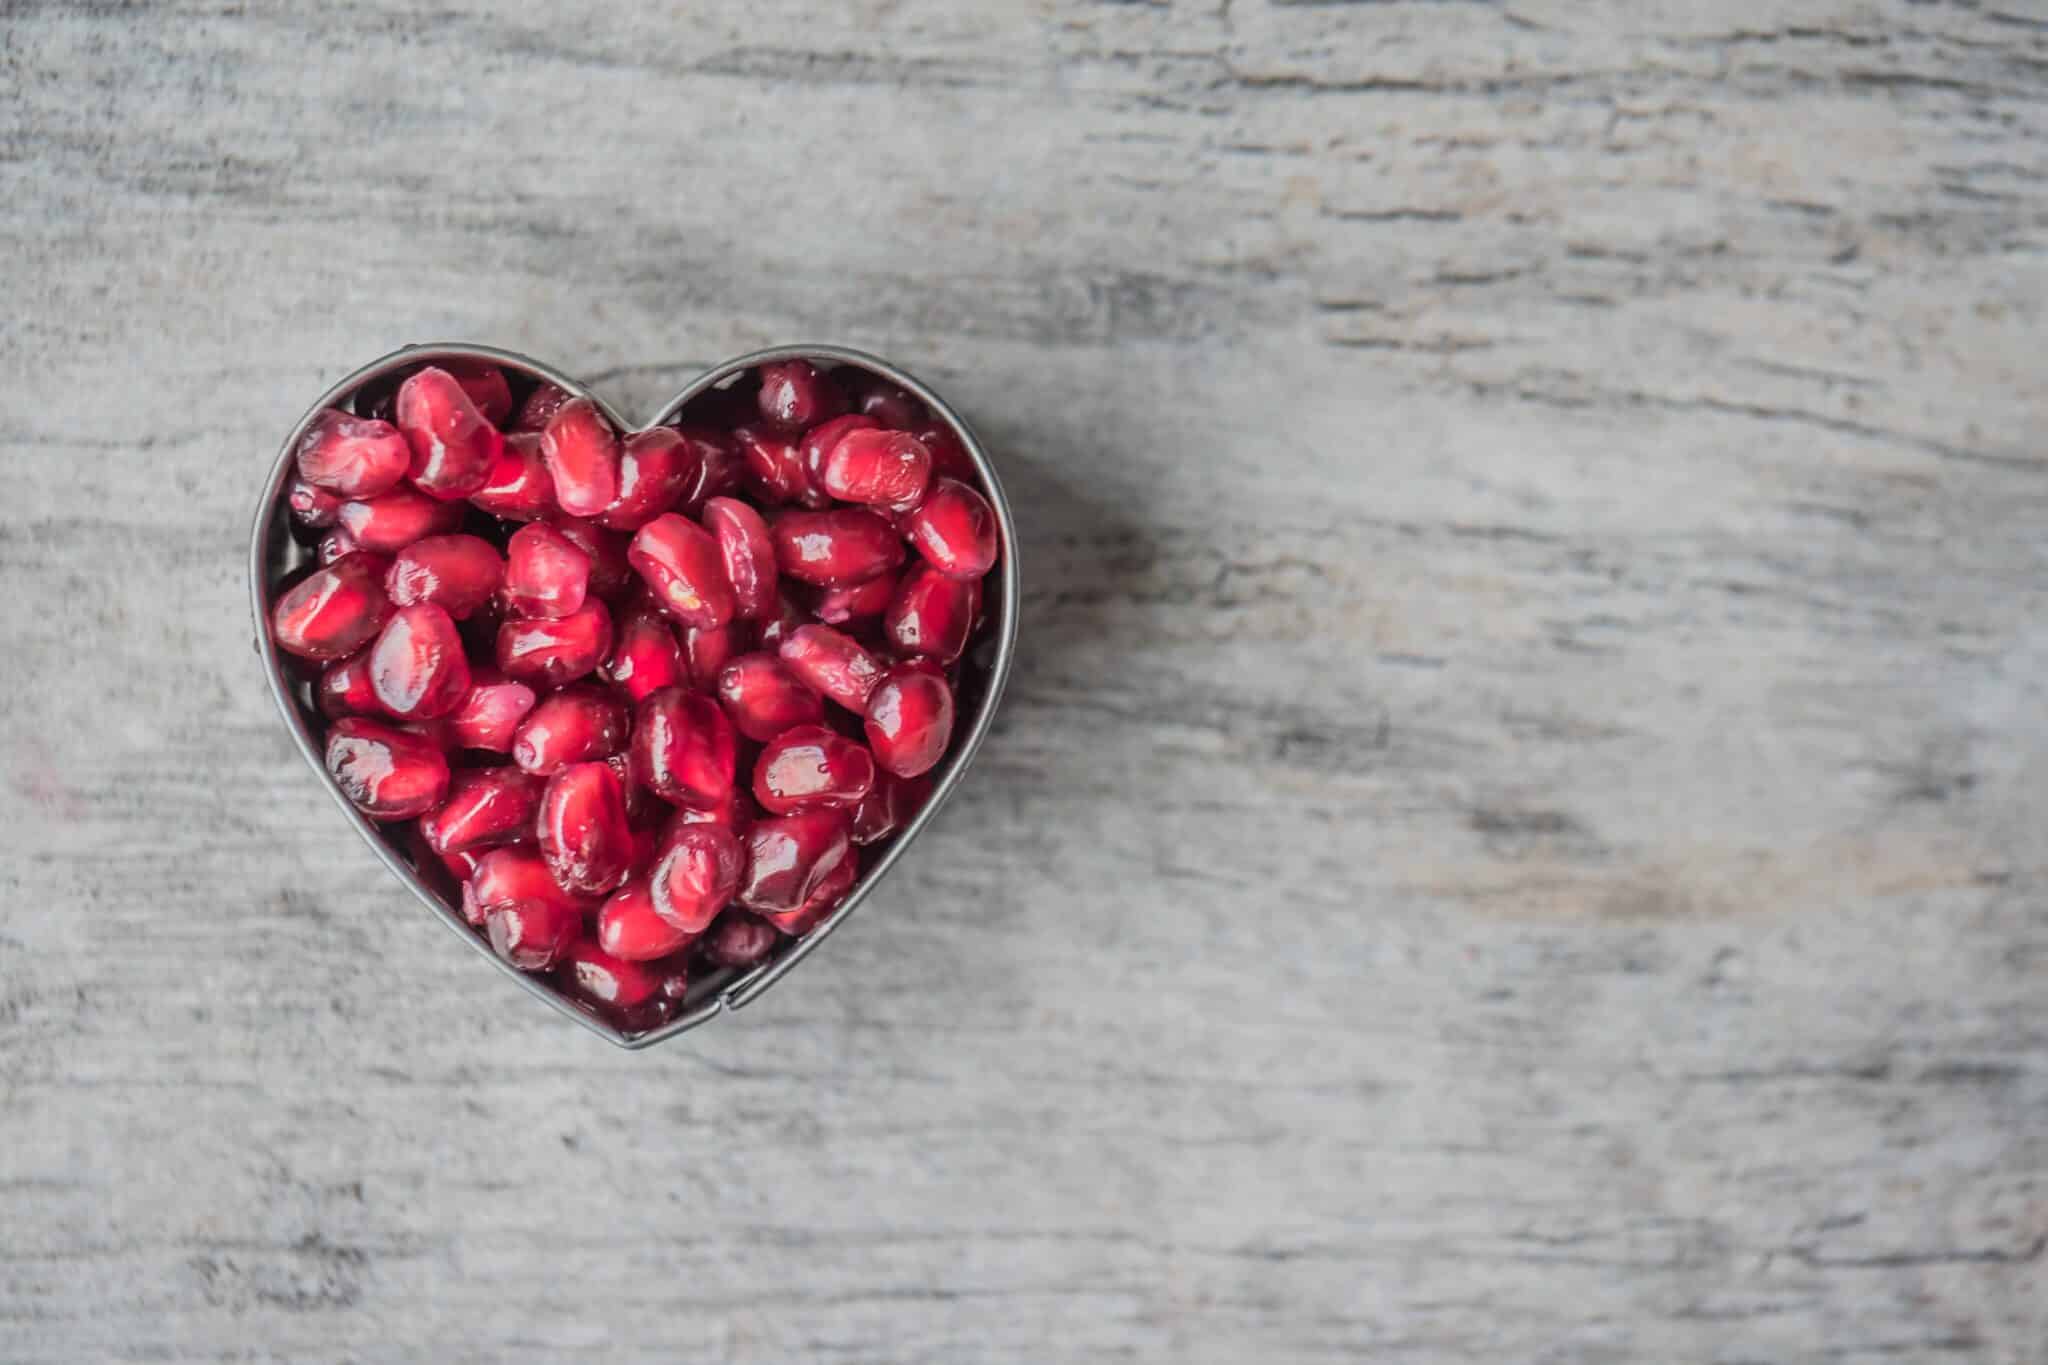 Pomegranate seeds in a heart shape on a table.